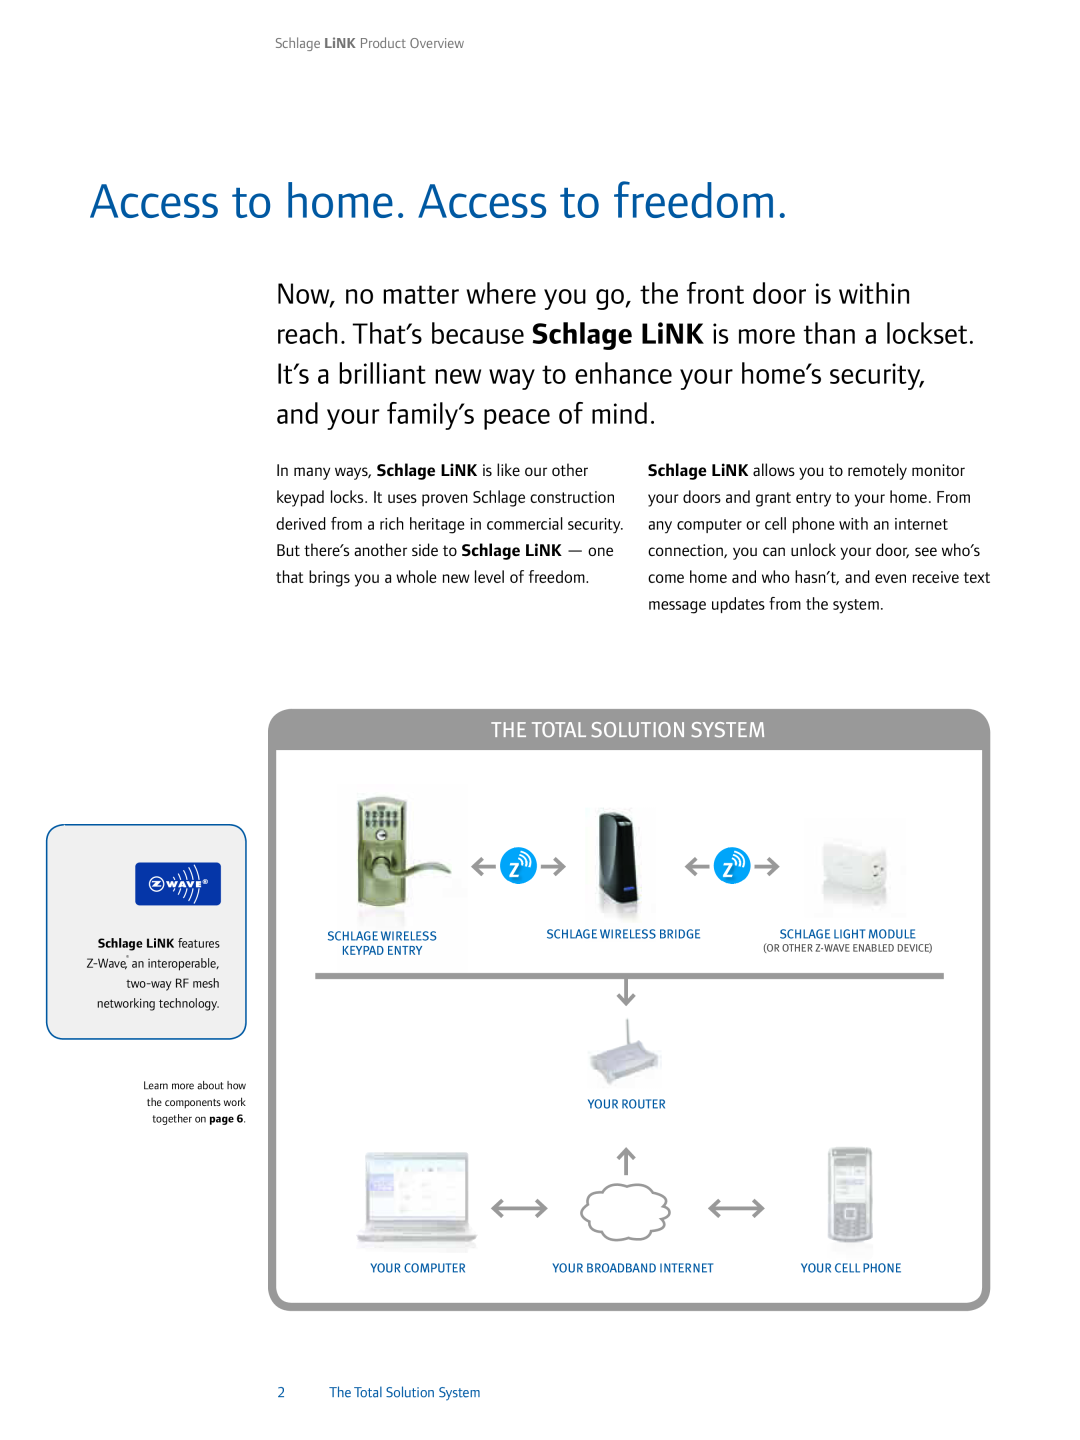 Ingersoll-Rand 1-877-288-7707 Access to home. Access to freedom, The Total Solution System, Schlage LiNK Product Overview 